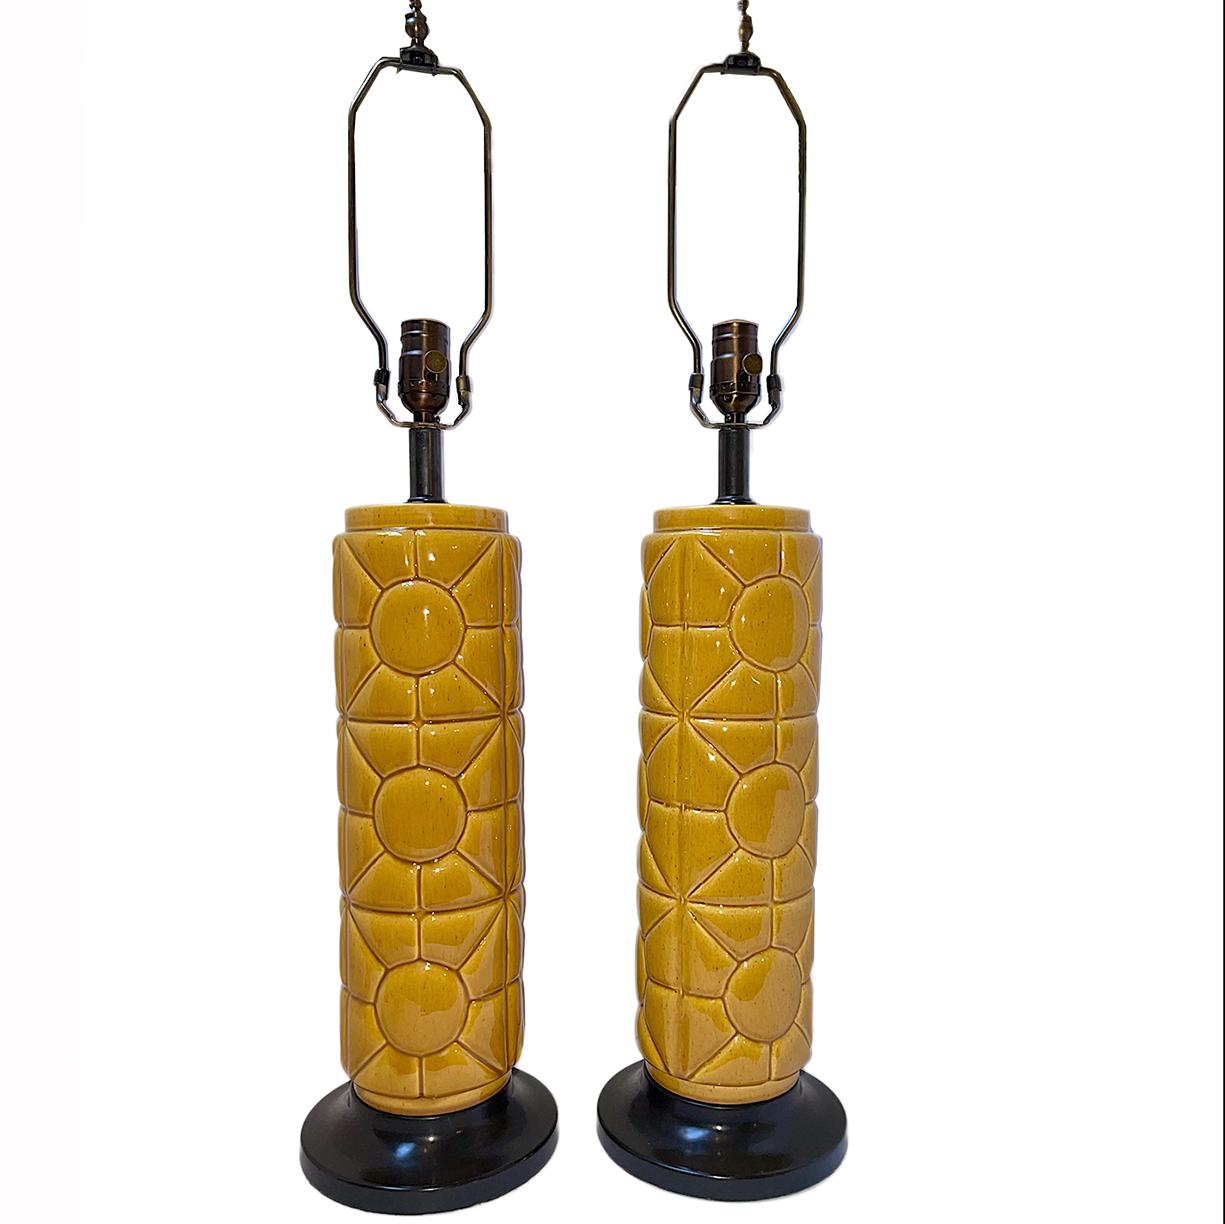 Pair of circa 1950's French porcelain lamps with yellow glaze geometric pattern and ebonized bases.

Measurements:
Height of body: 19.75